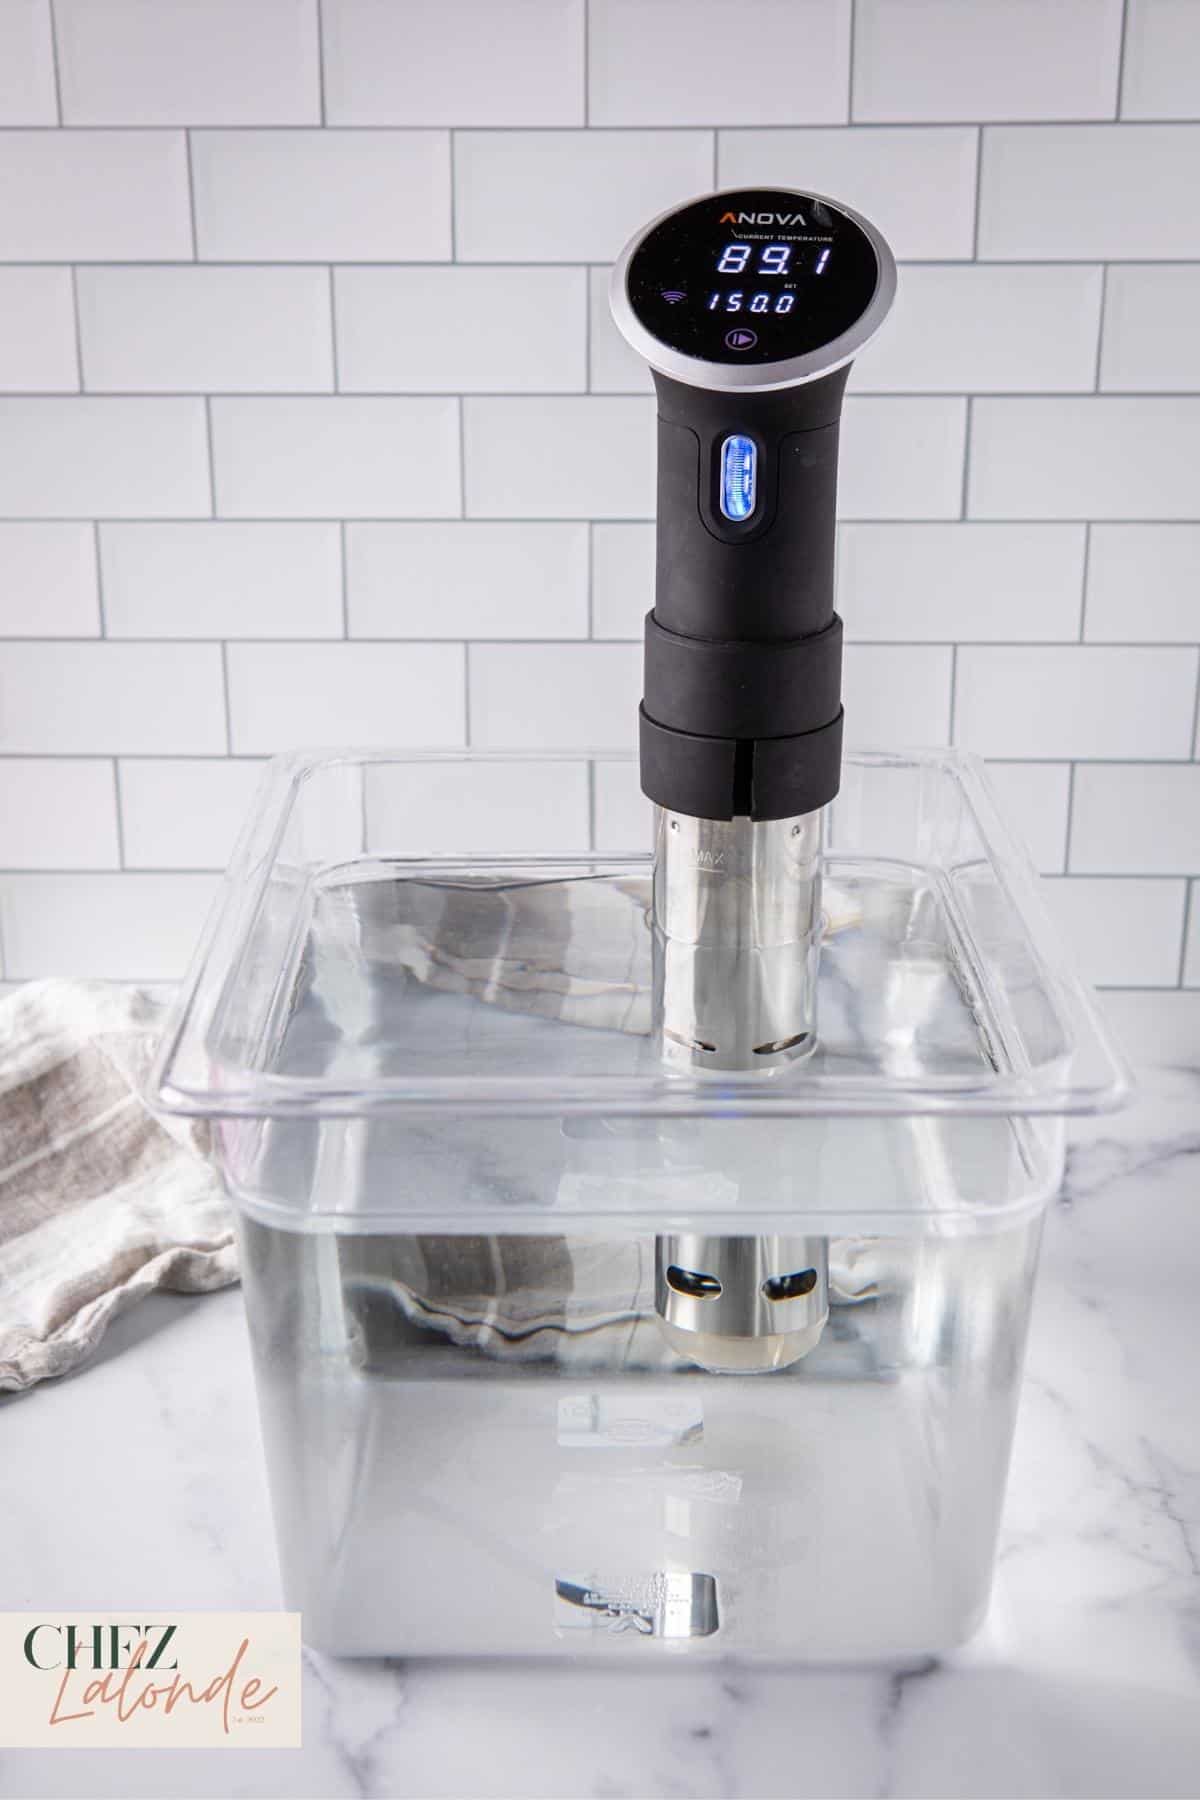 This is Sous Vide cooking. A clear container attached with a Sous Vide precision cooker.